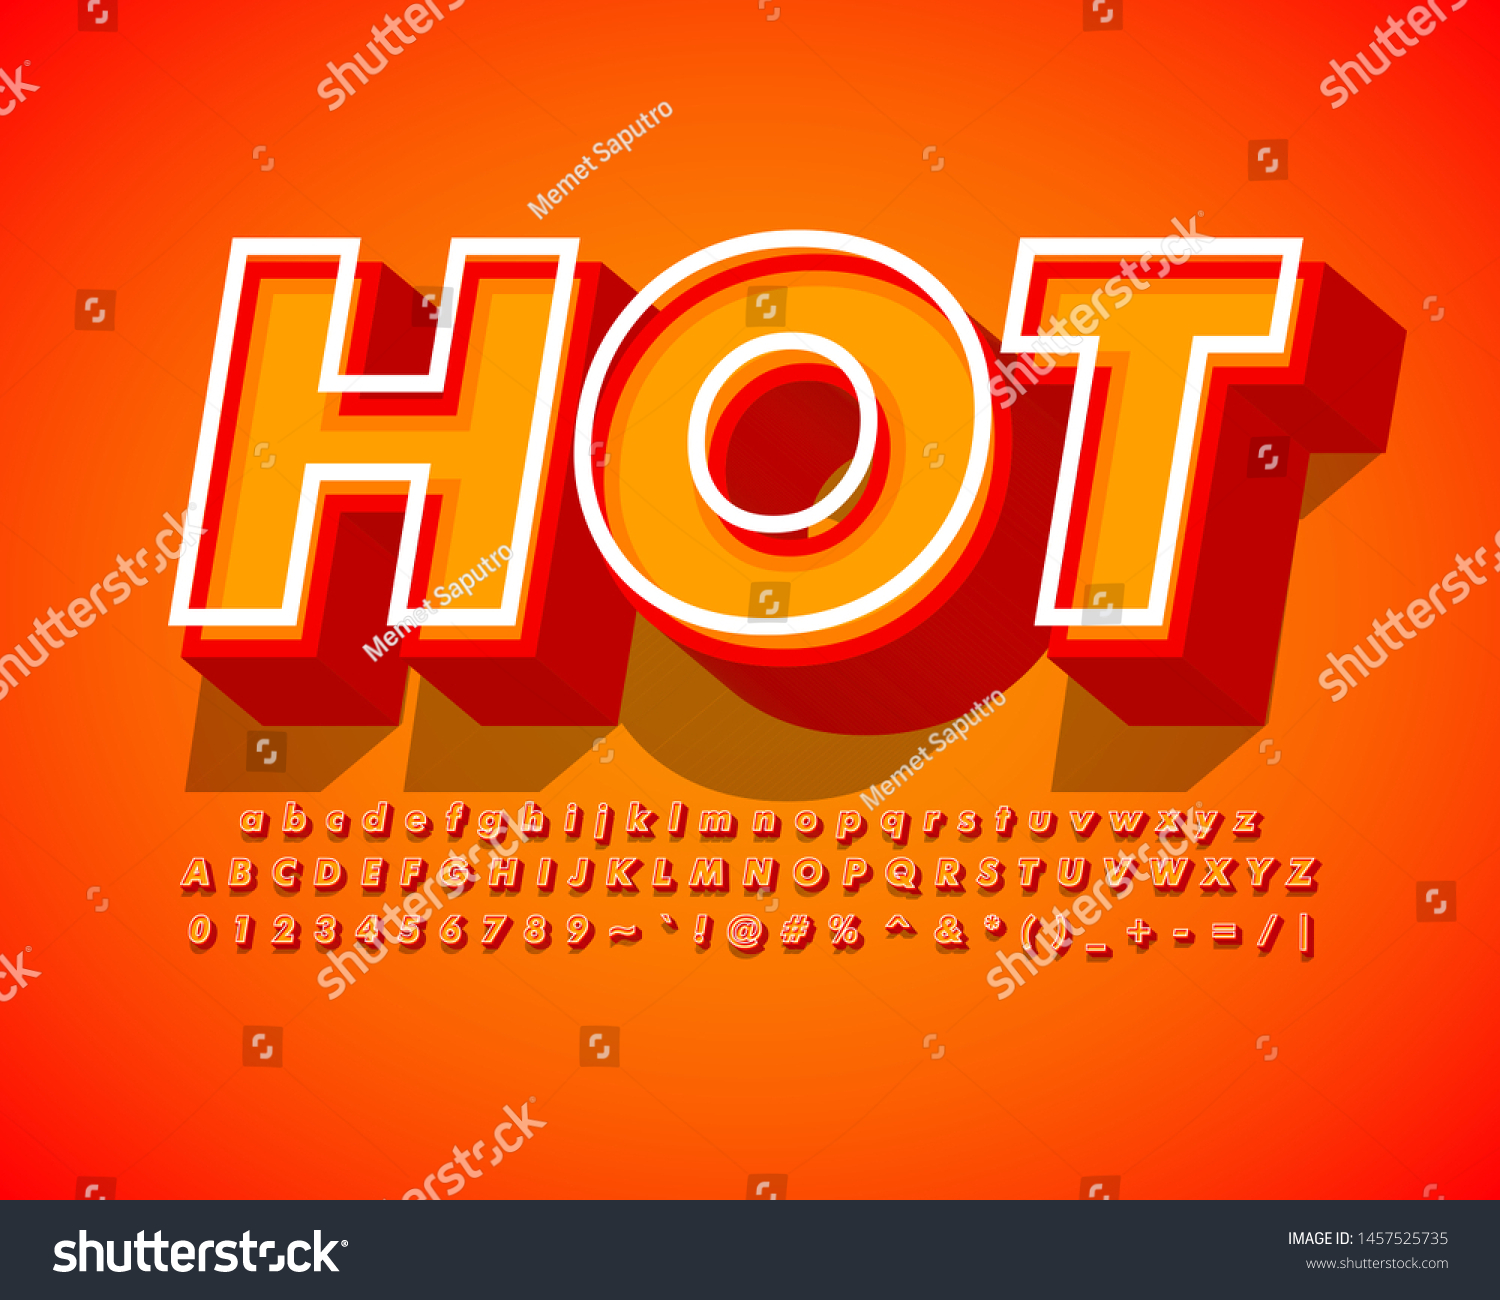 Realistic Hot 3d Text Style Royalty Free Stock Vector 1457525735 7116